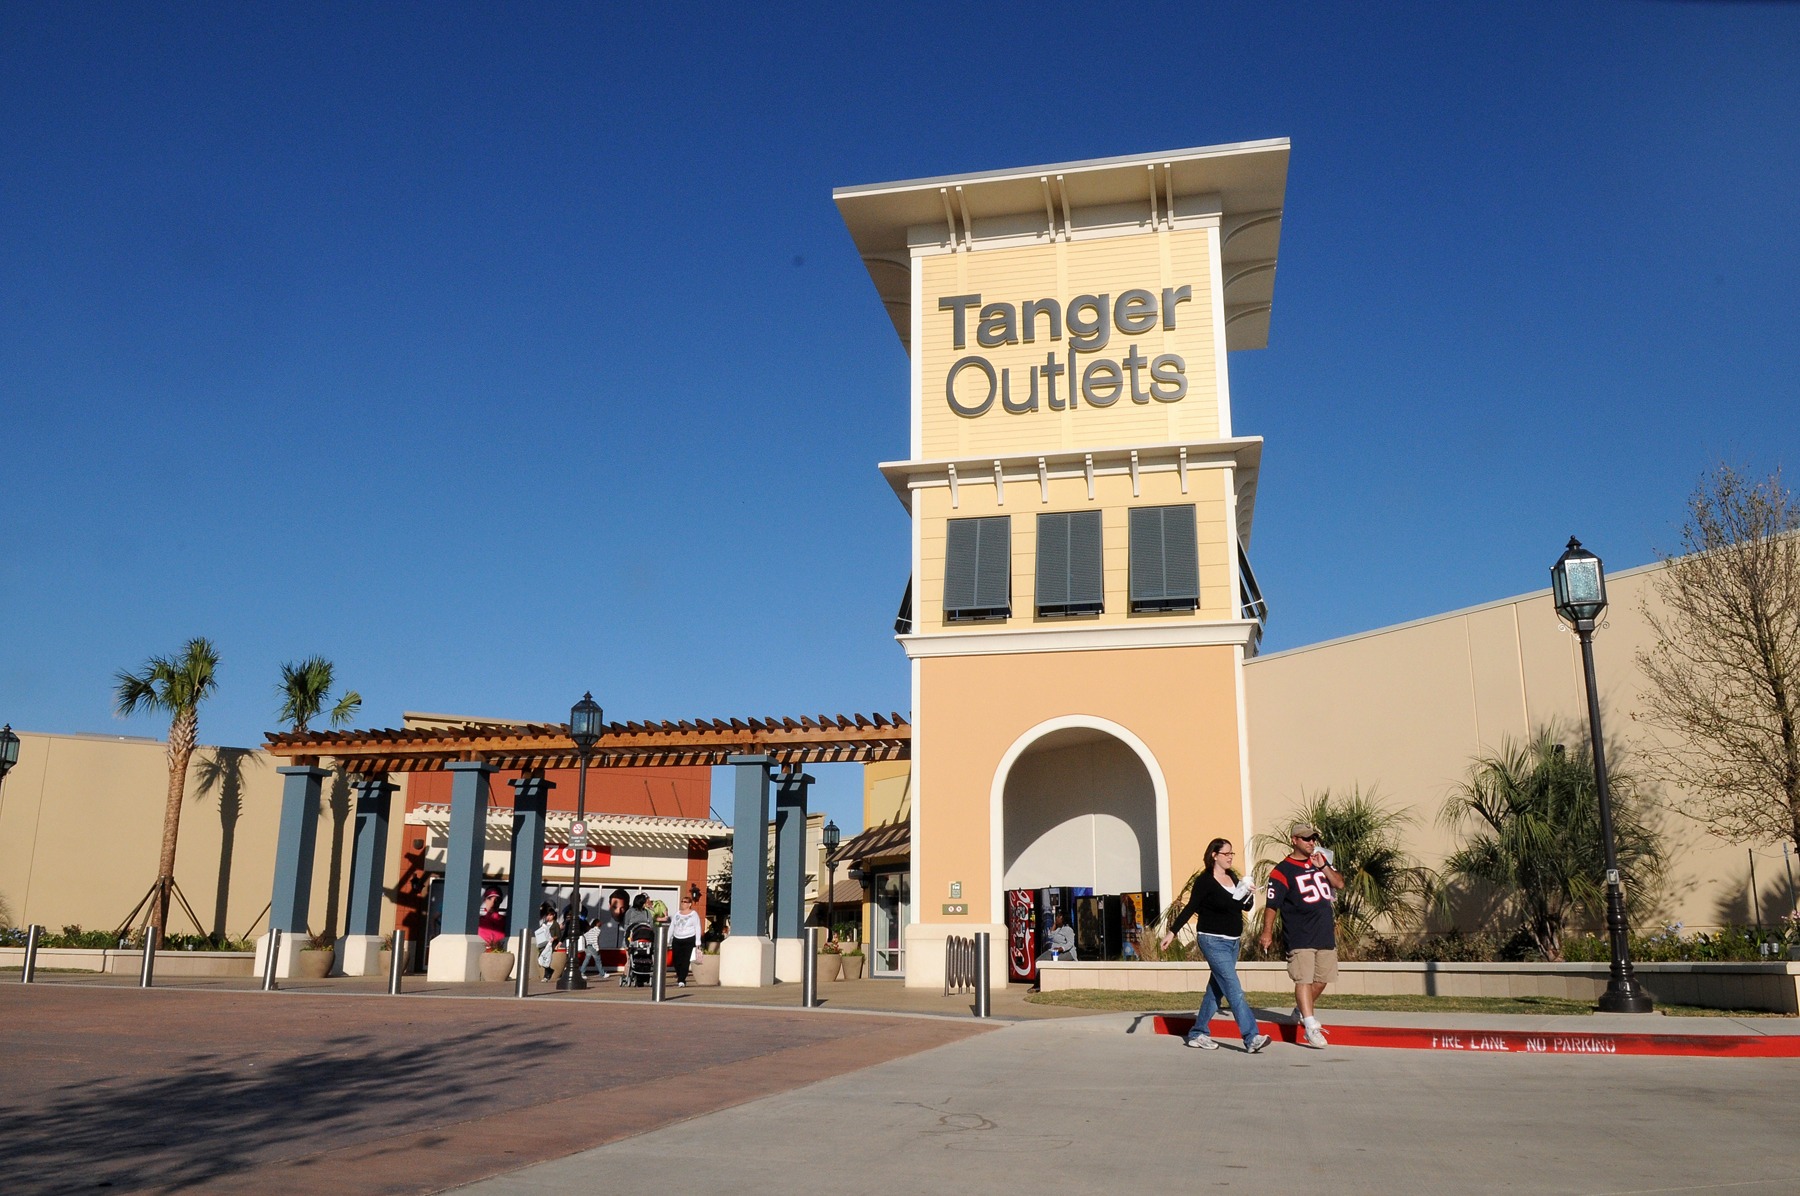 Tanger Outlets Houston brings six women and minority-owned shops